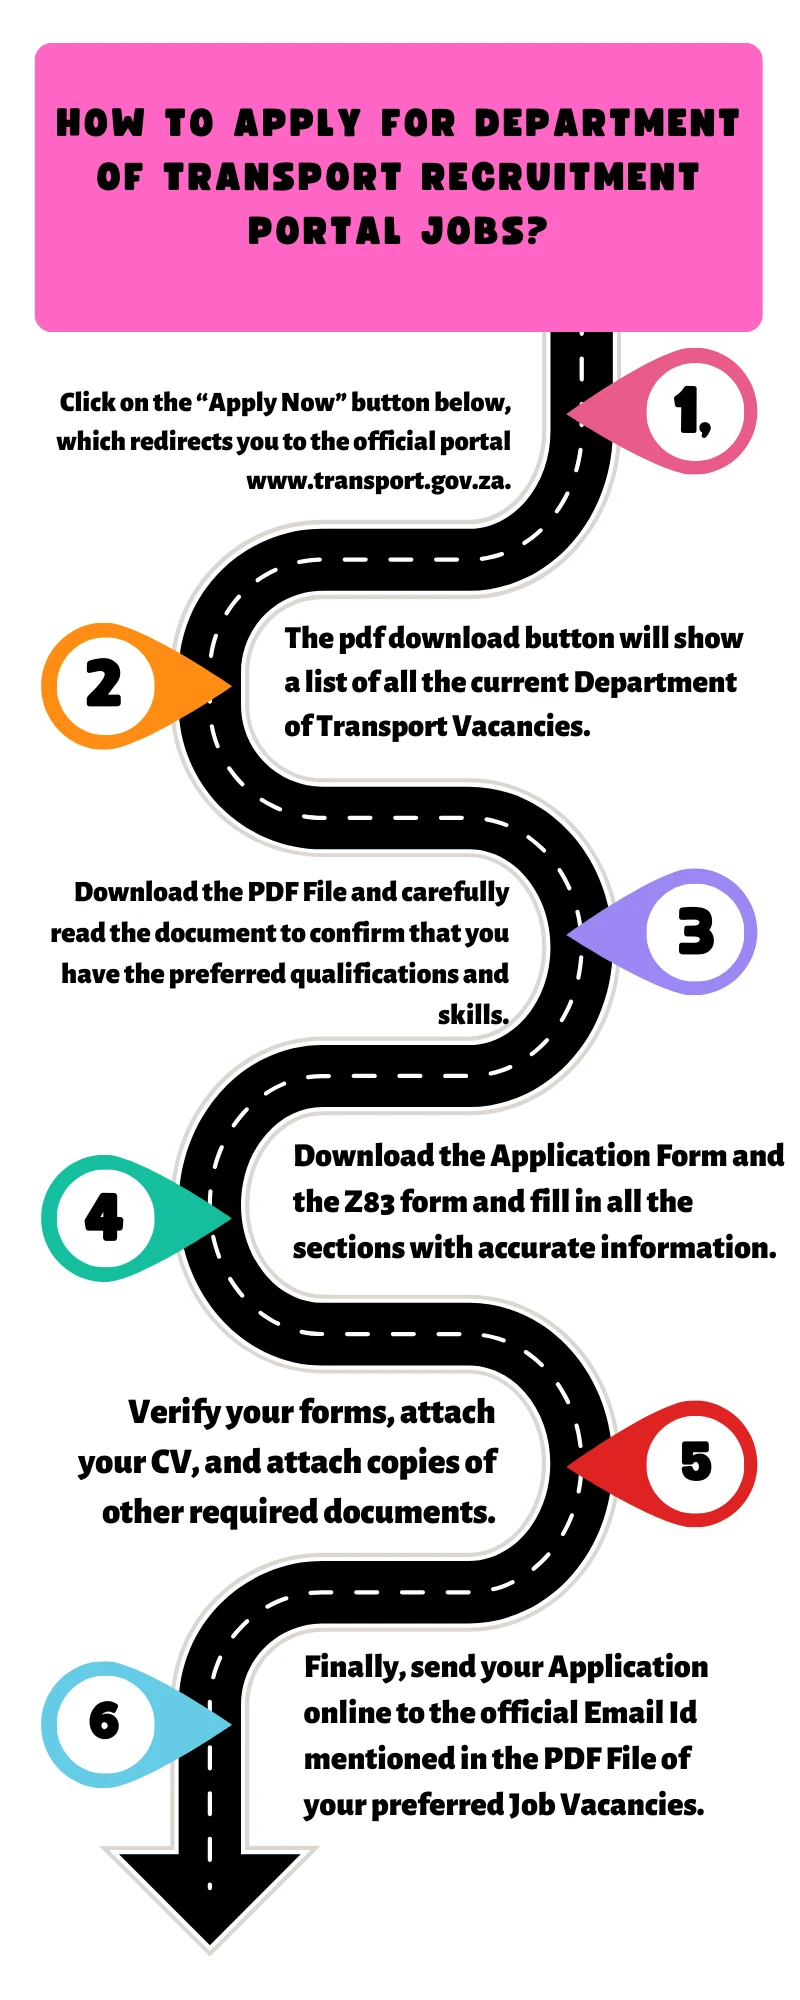 How To Apply for Department of Transport Recruitment Portal Jobs?